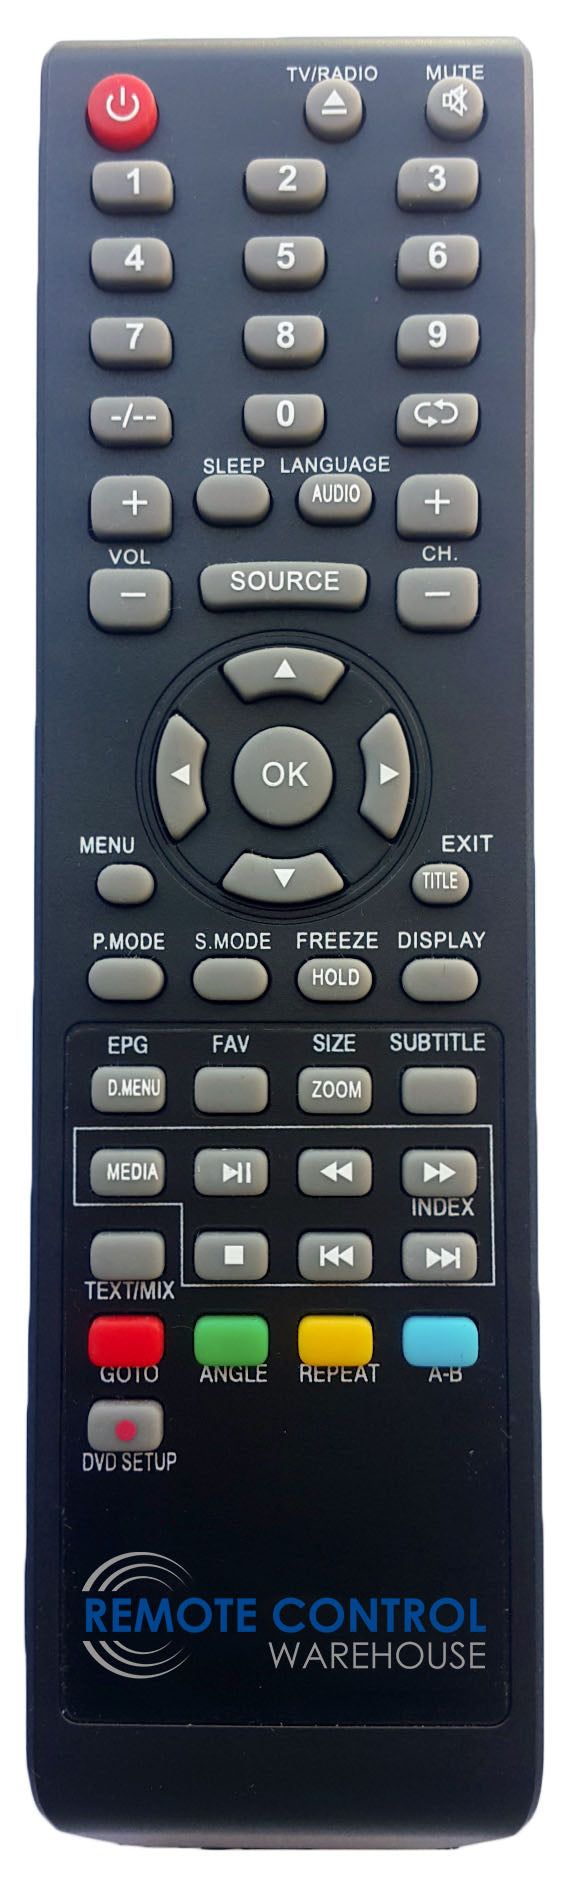 REPLACEMENT BAUHN REMOTE CONTROL SUBSTITUTE ATV-50FHD3 ATV50FHD3 TV - Remote Control Warehouse